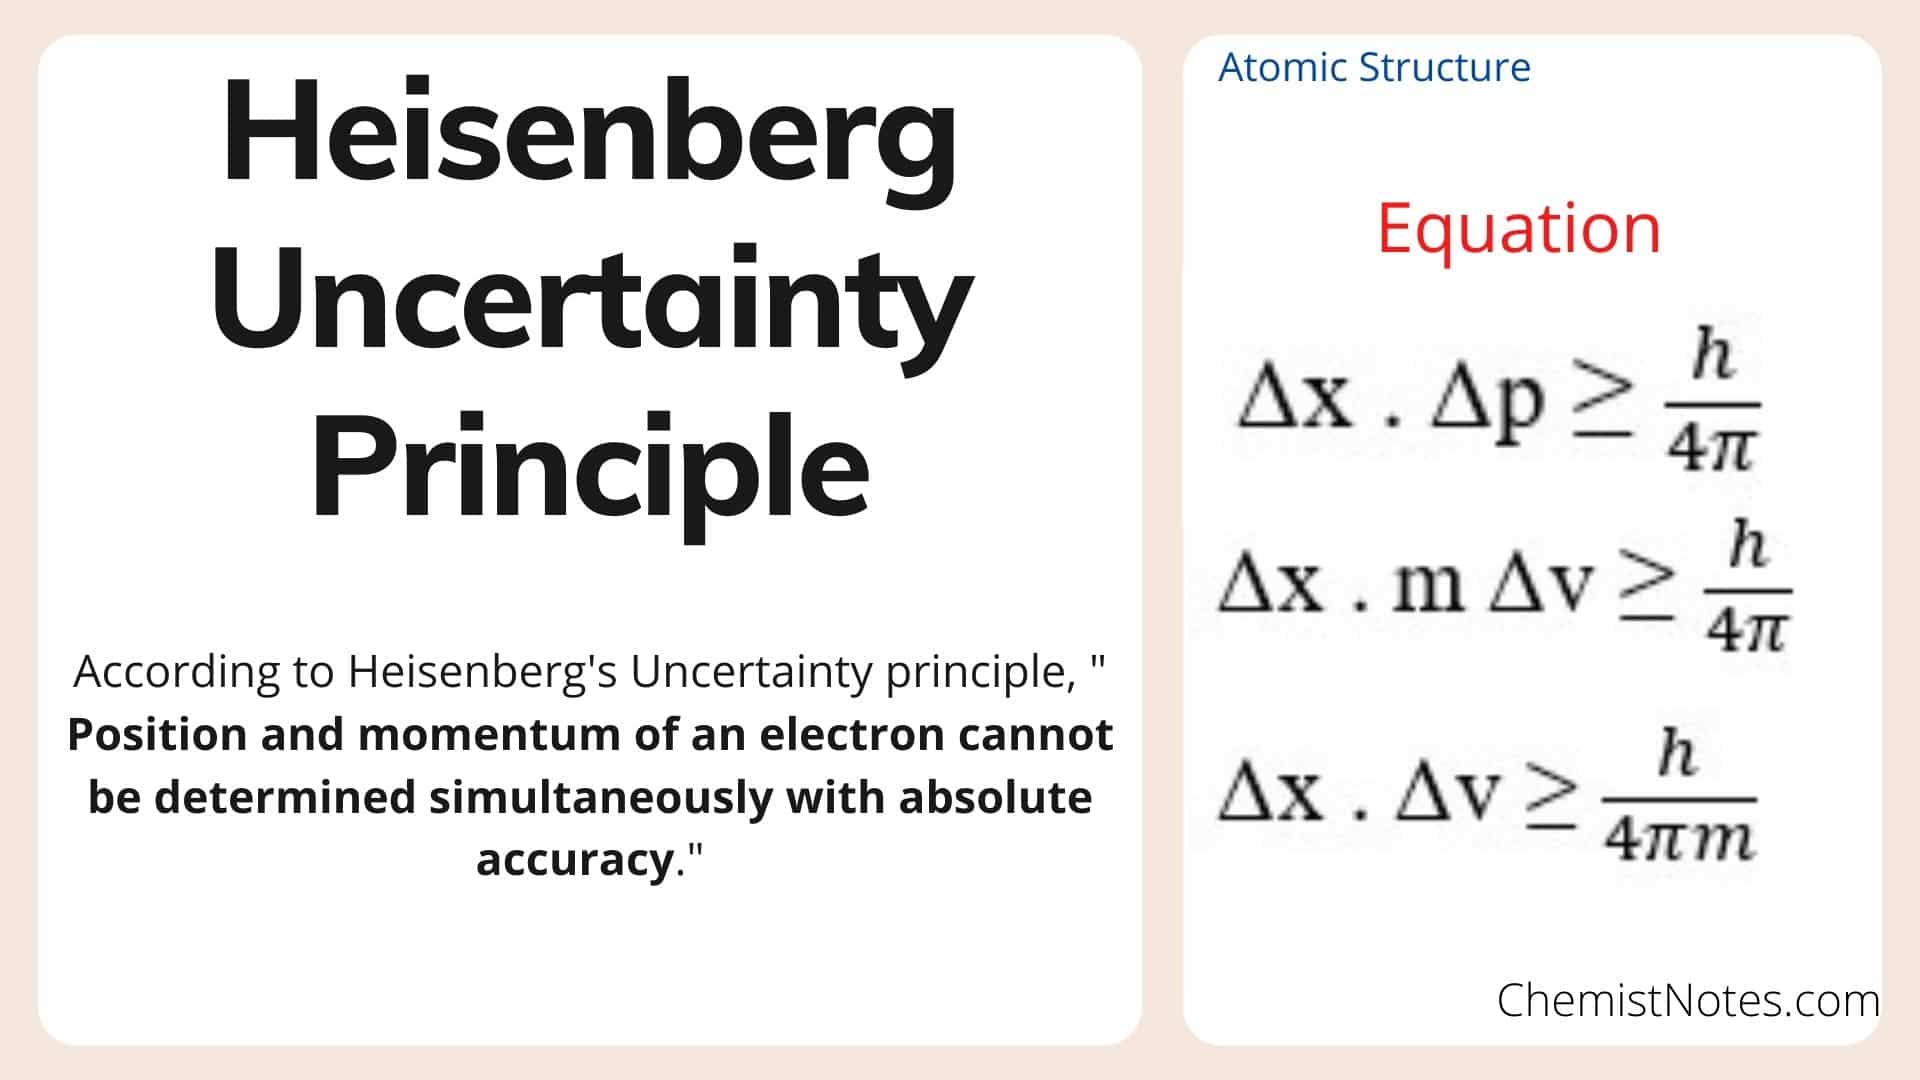 the heisenberg uncertainty principle states that